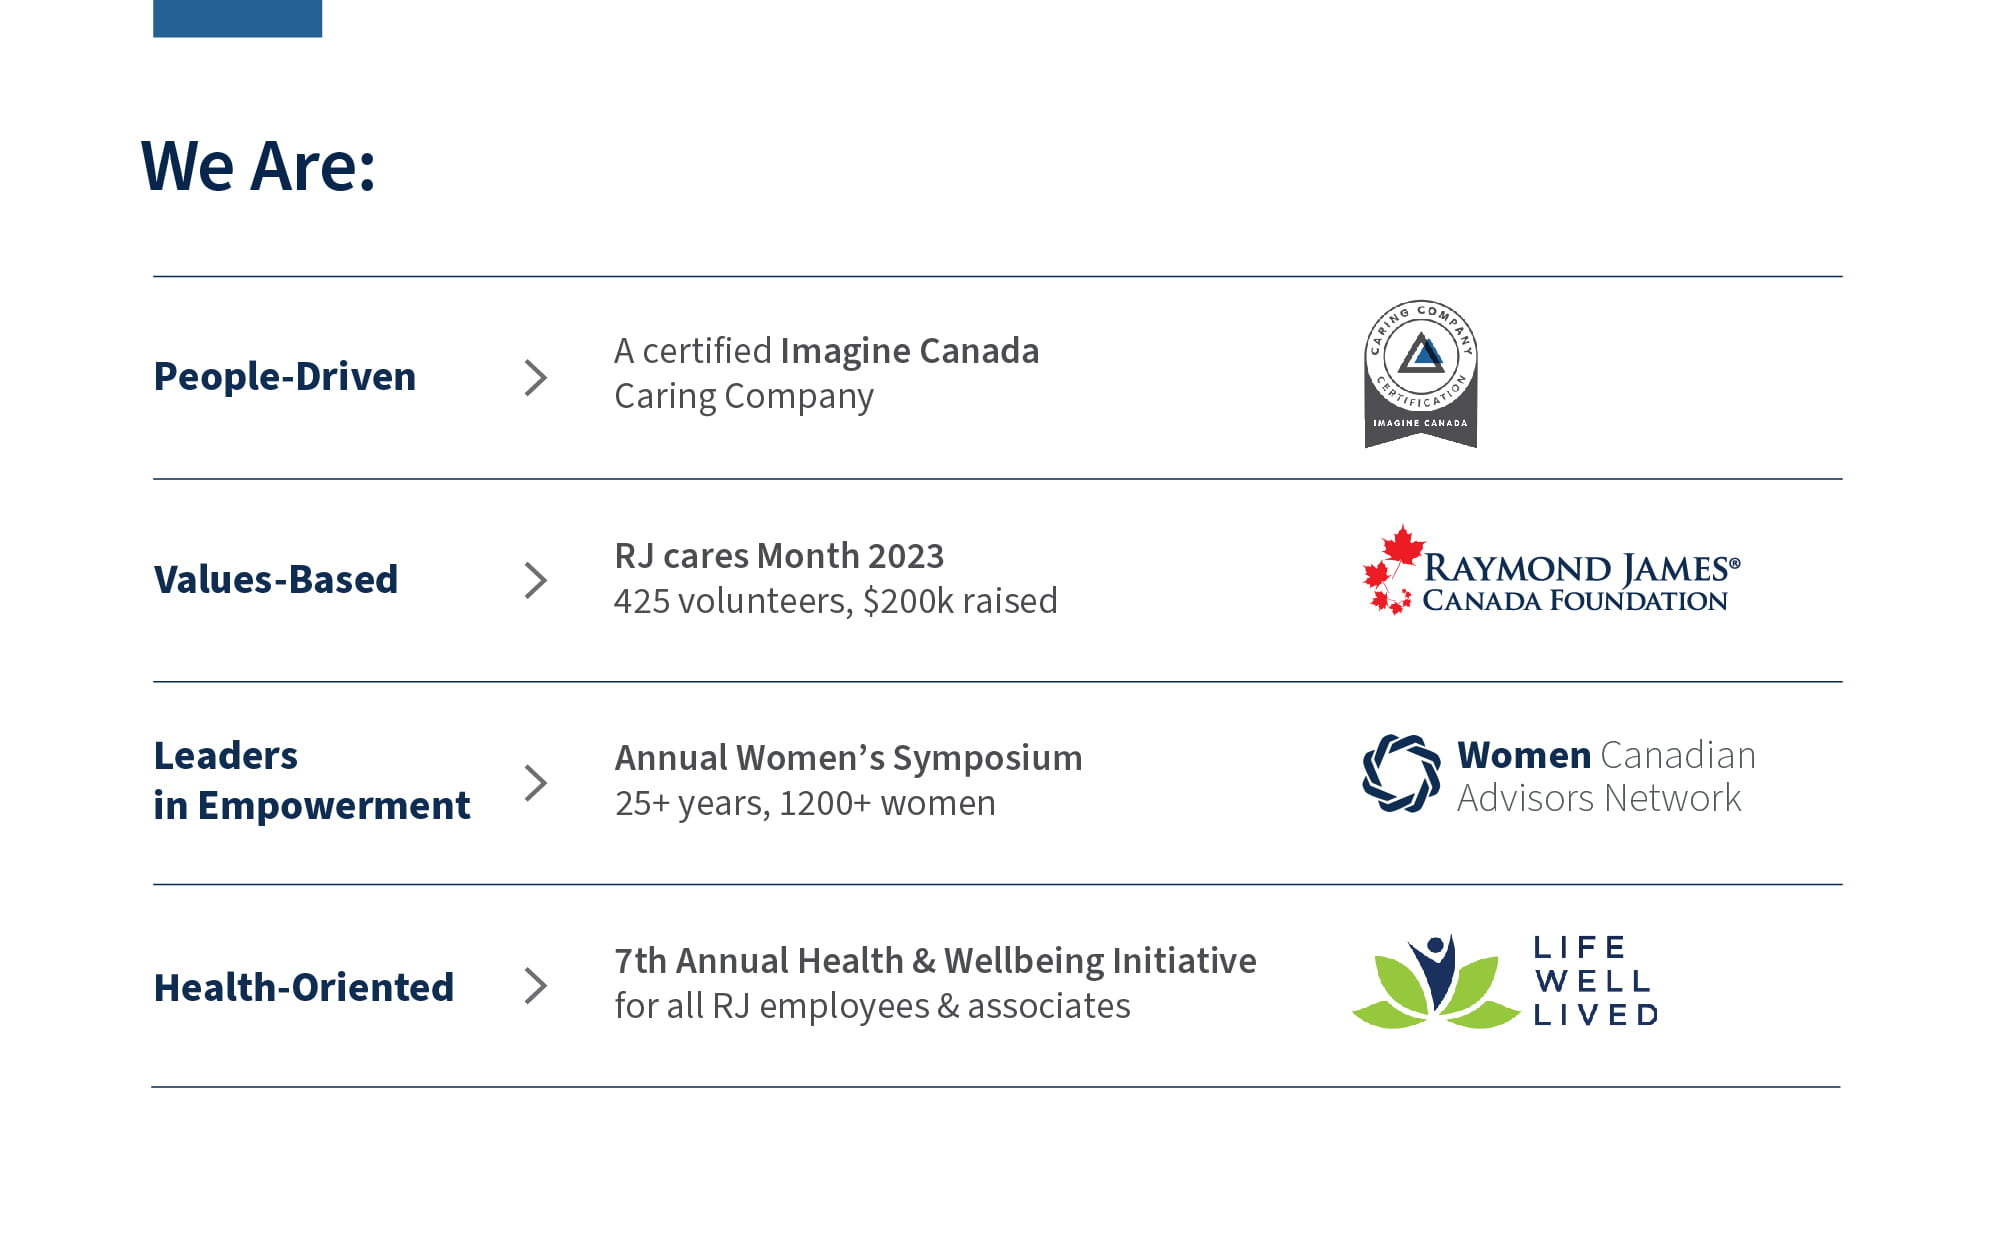 We are:  People Driven   A certified Imagine Canada Caring Company Values-Based  RJ cares Month 2023  425 volunteers, $200K raised Leaders in Empowerment  Annual Women’s Symposium  25+ years, 1200+ women Health-Oriented   7th Annual Health & Wellbeing Initiative for all RJ employees & associates